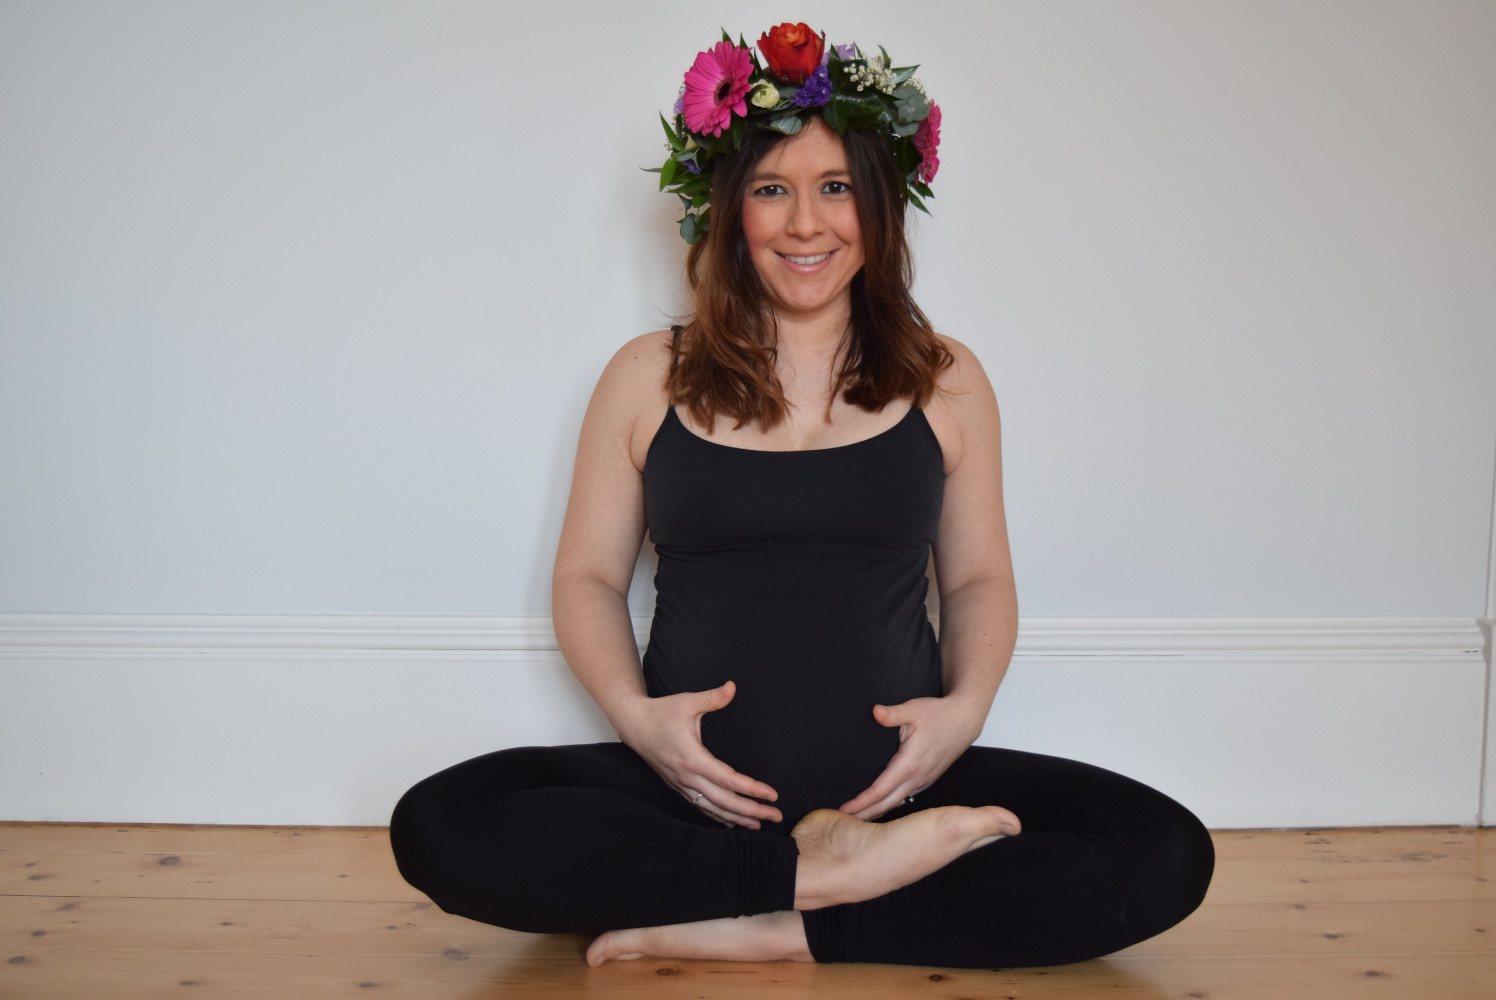 Six Part Prenatal Yoga Series with Jahliele — Taiga Yoga and Therapy Centre